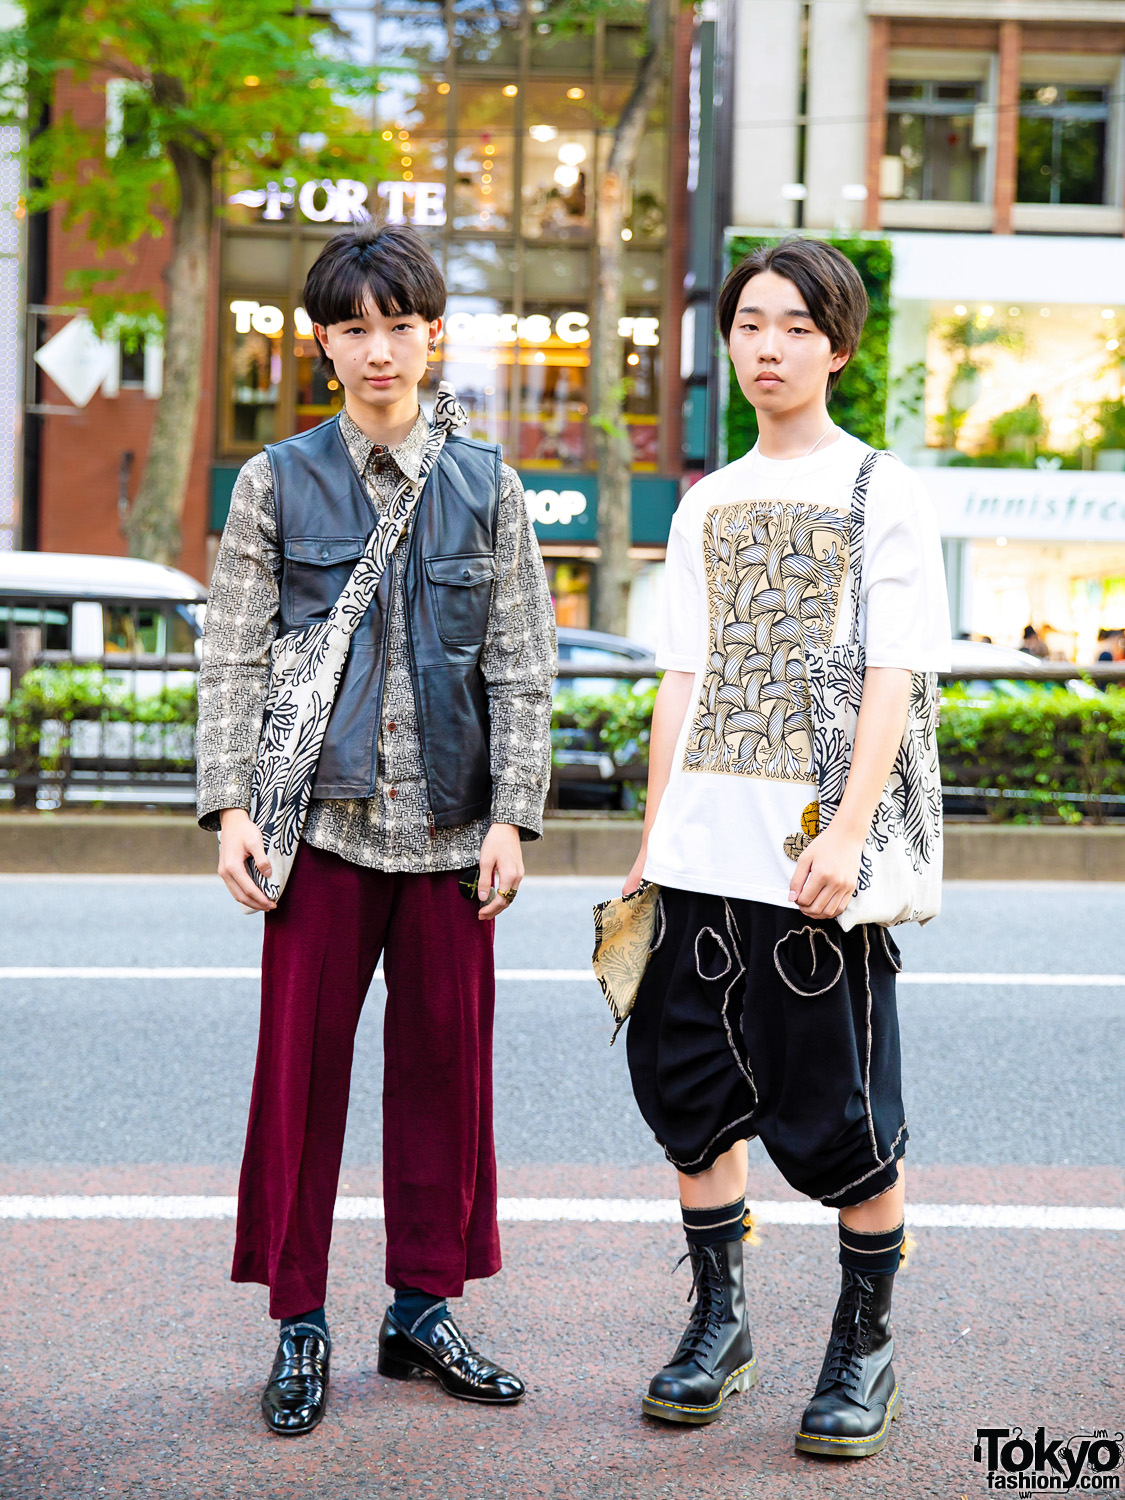 Christopher Nemeth Tokyo Styles w/ Givenchy, Dr. Martens & Tokyo Human Experiments